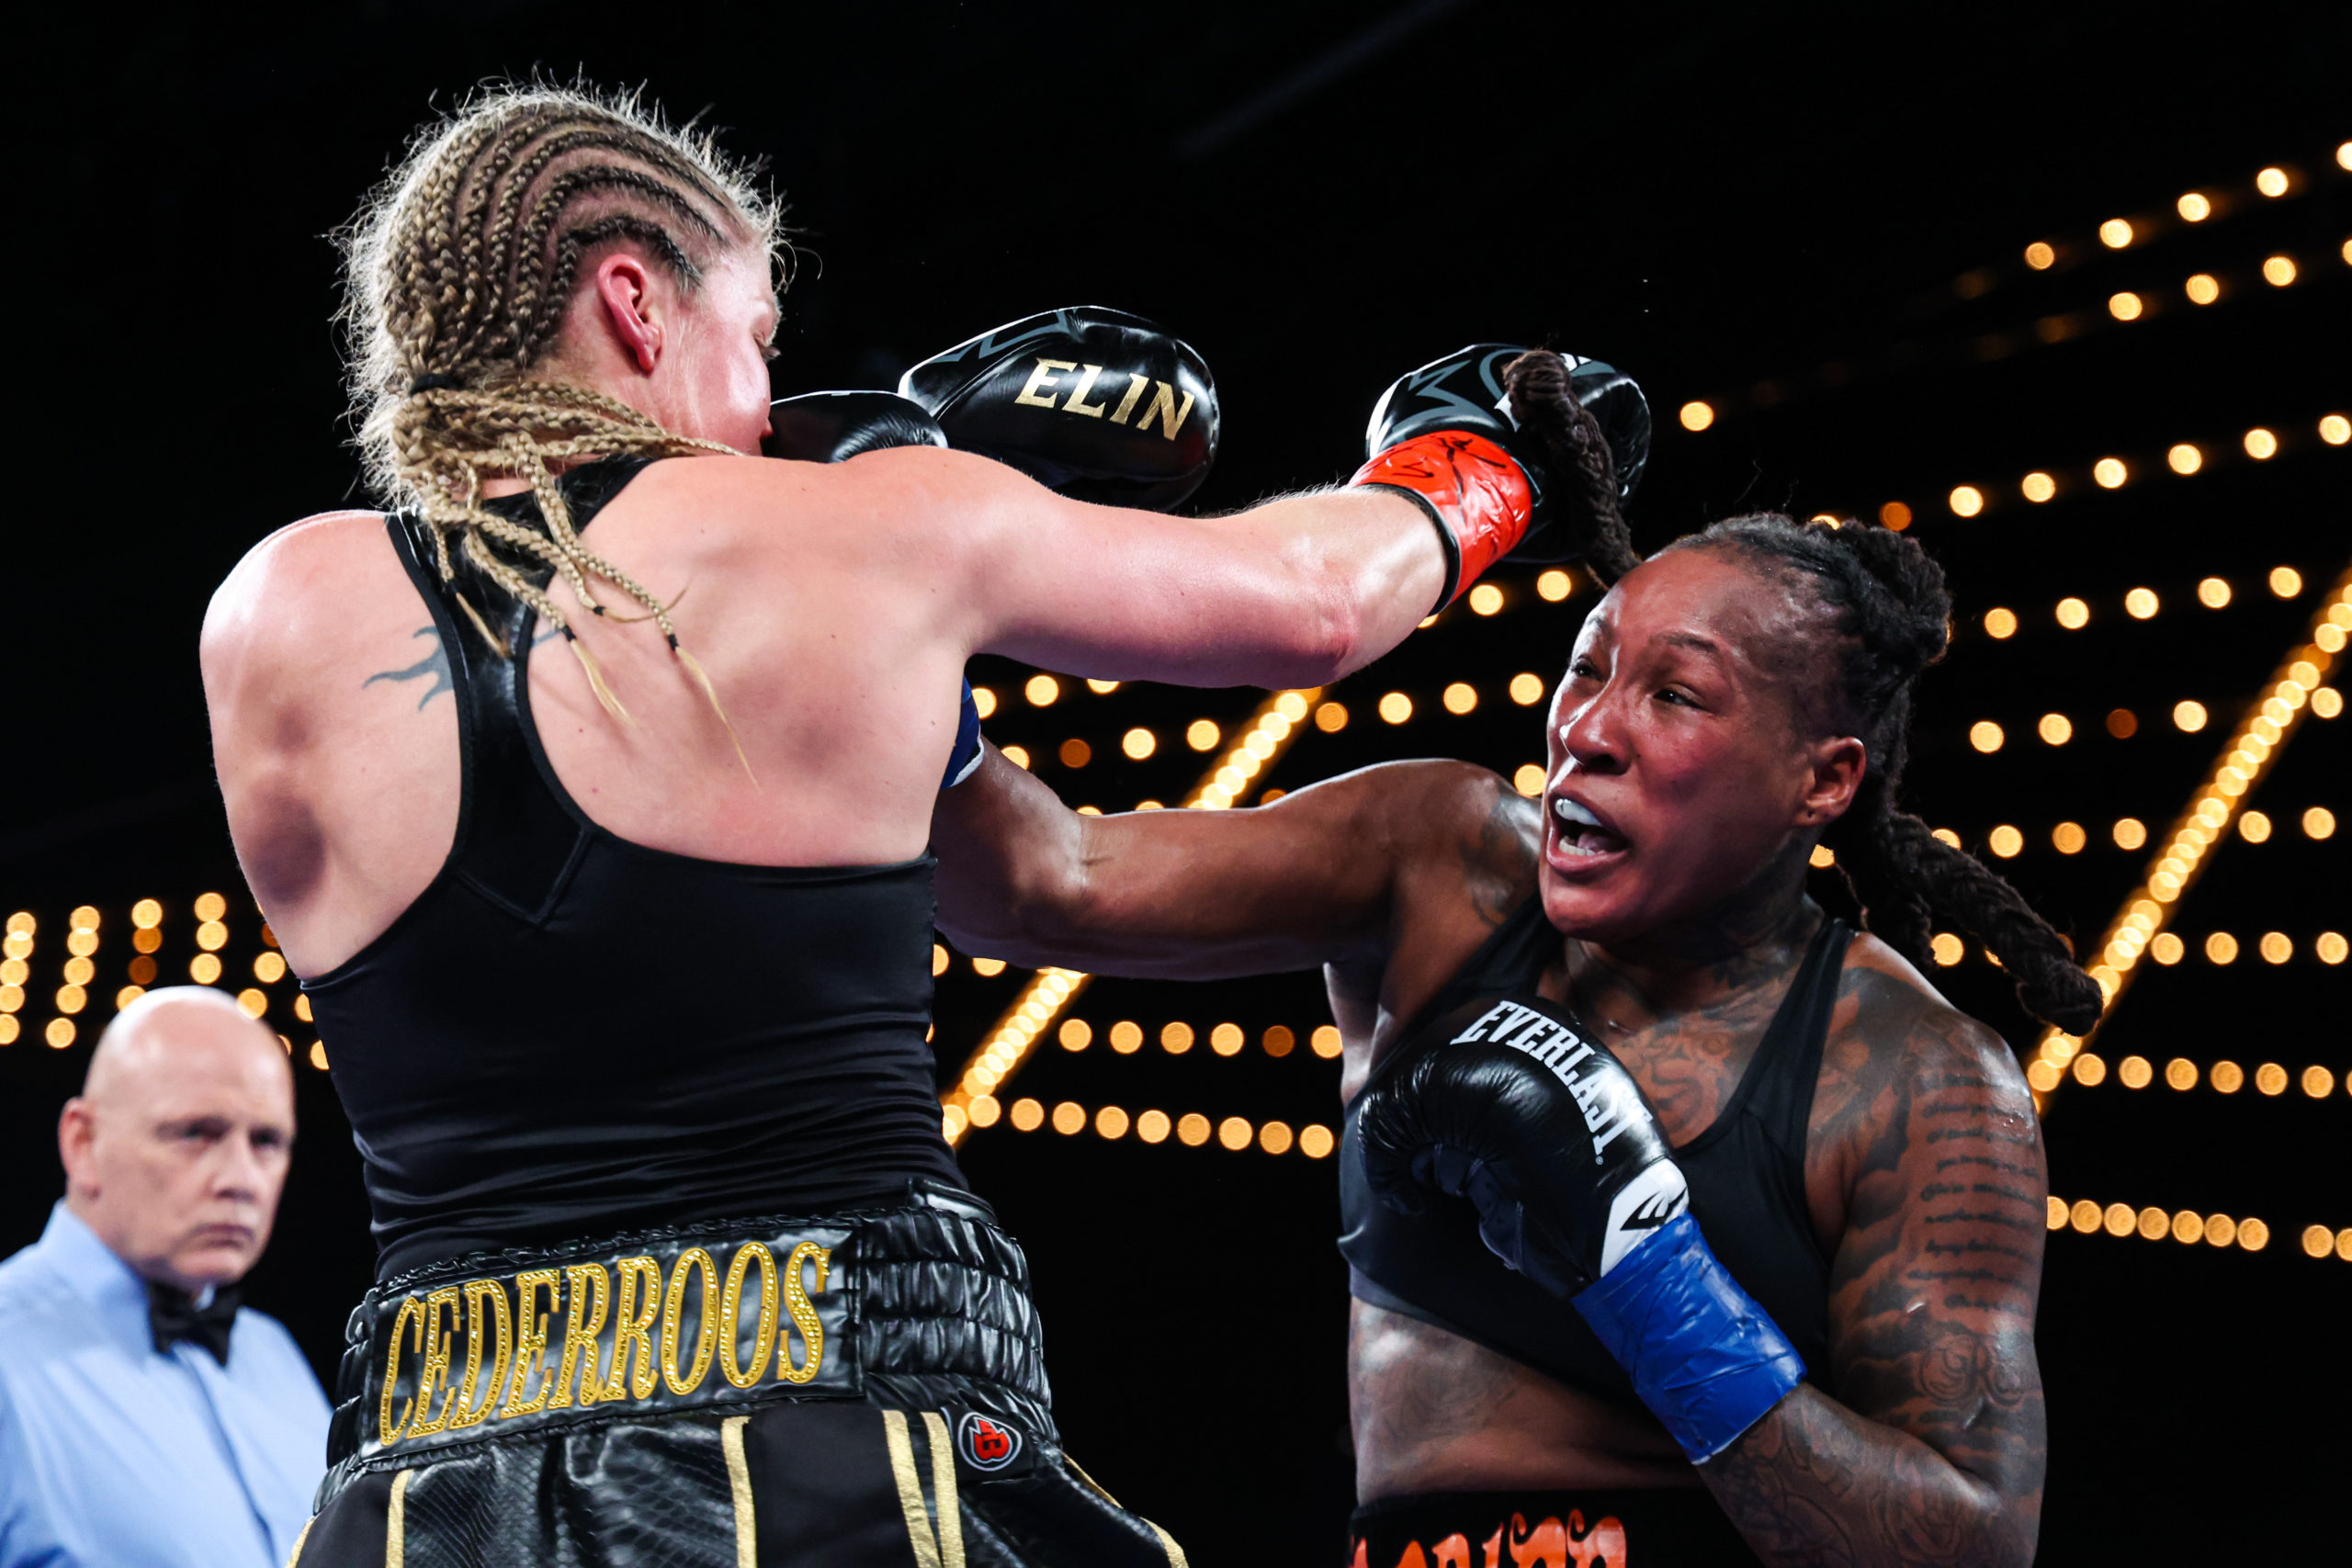 Shadasia Green knocked out Cederroos